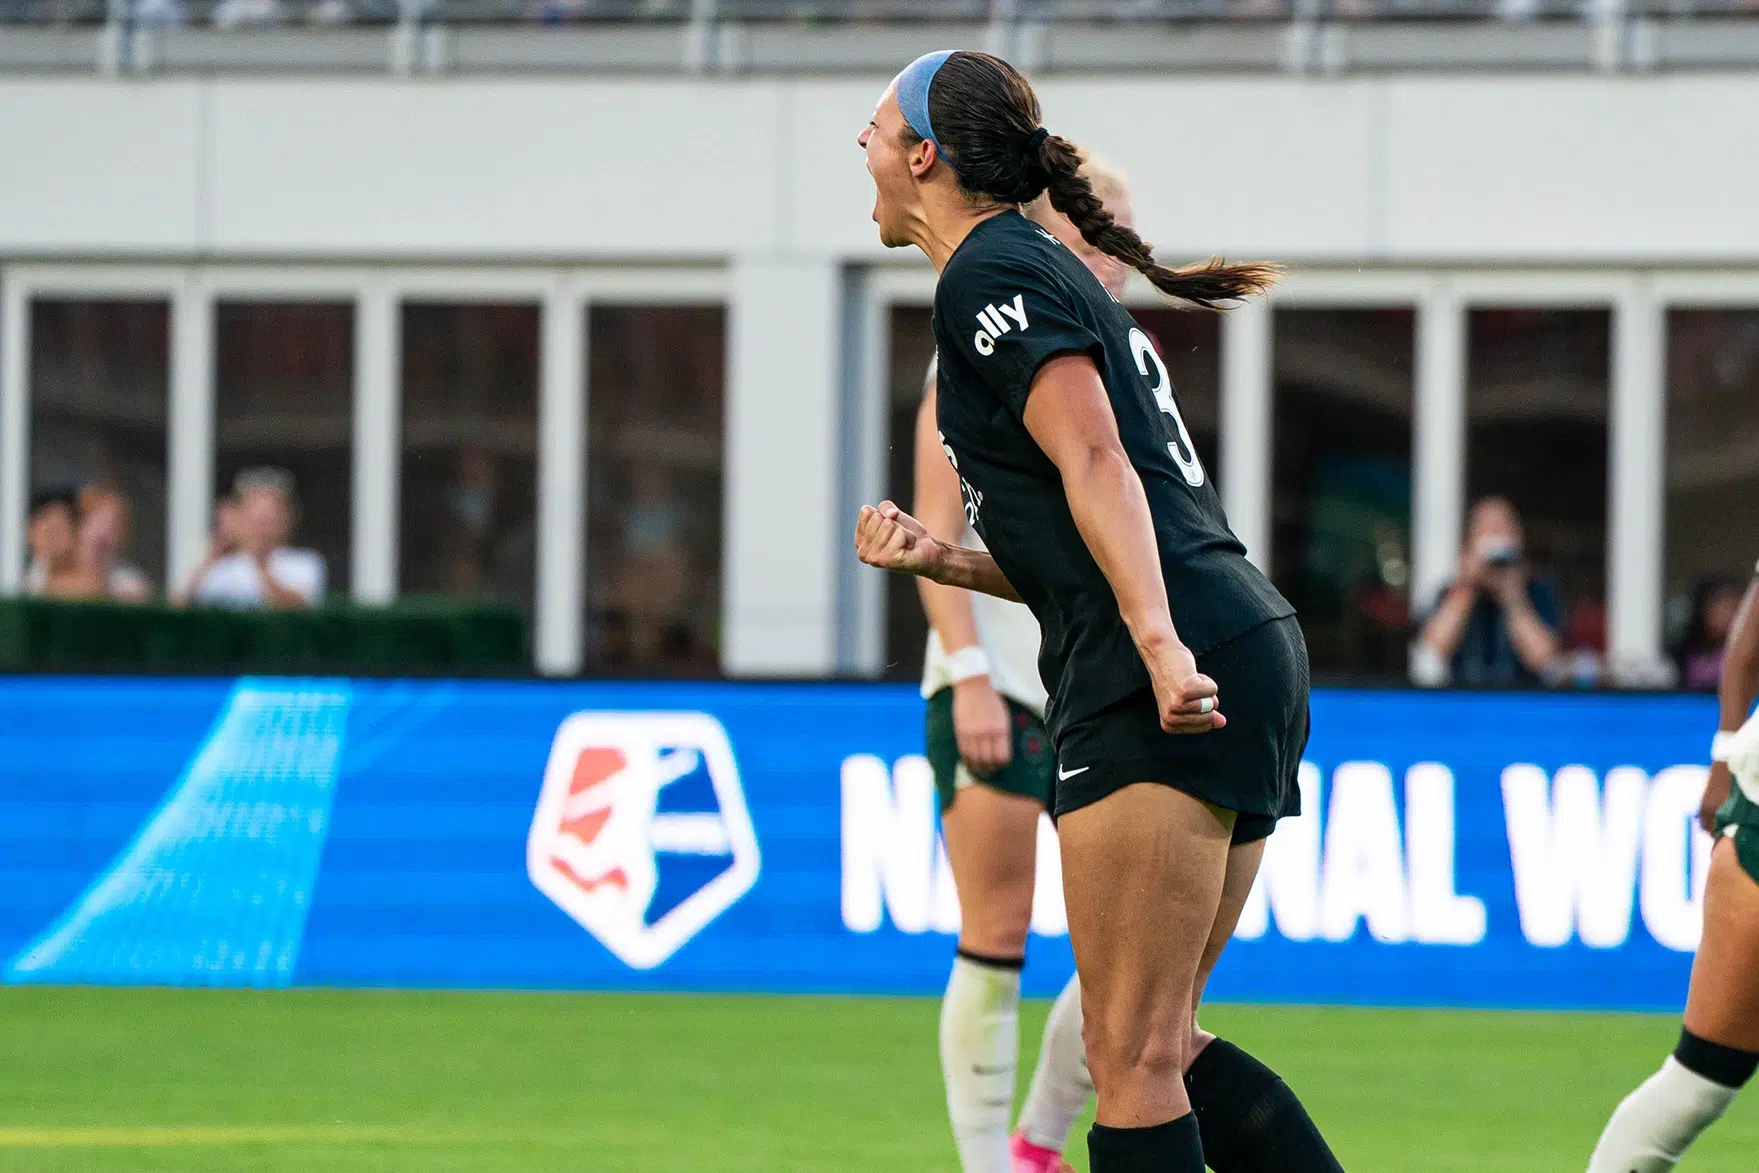 Ashley Hatch in an all black uniform with her hair in a braid pumps her fist and yells in celebration of scoring a penalty kick.